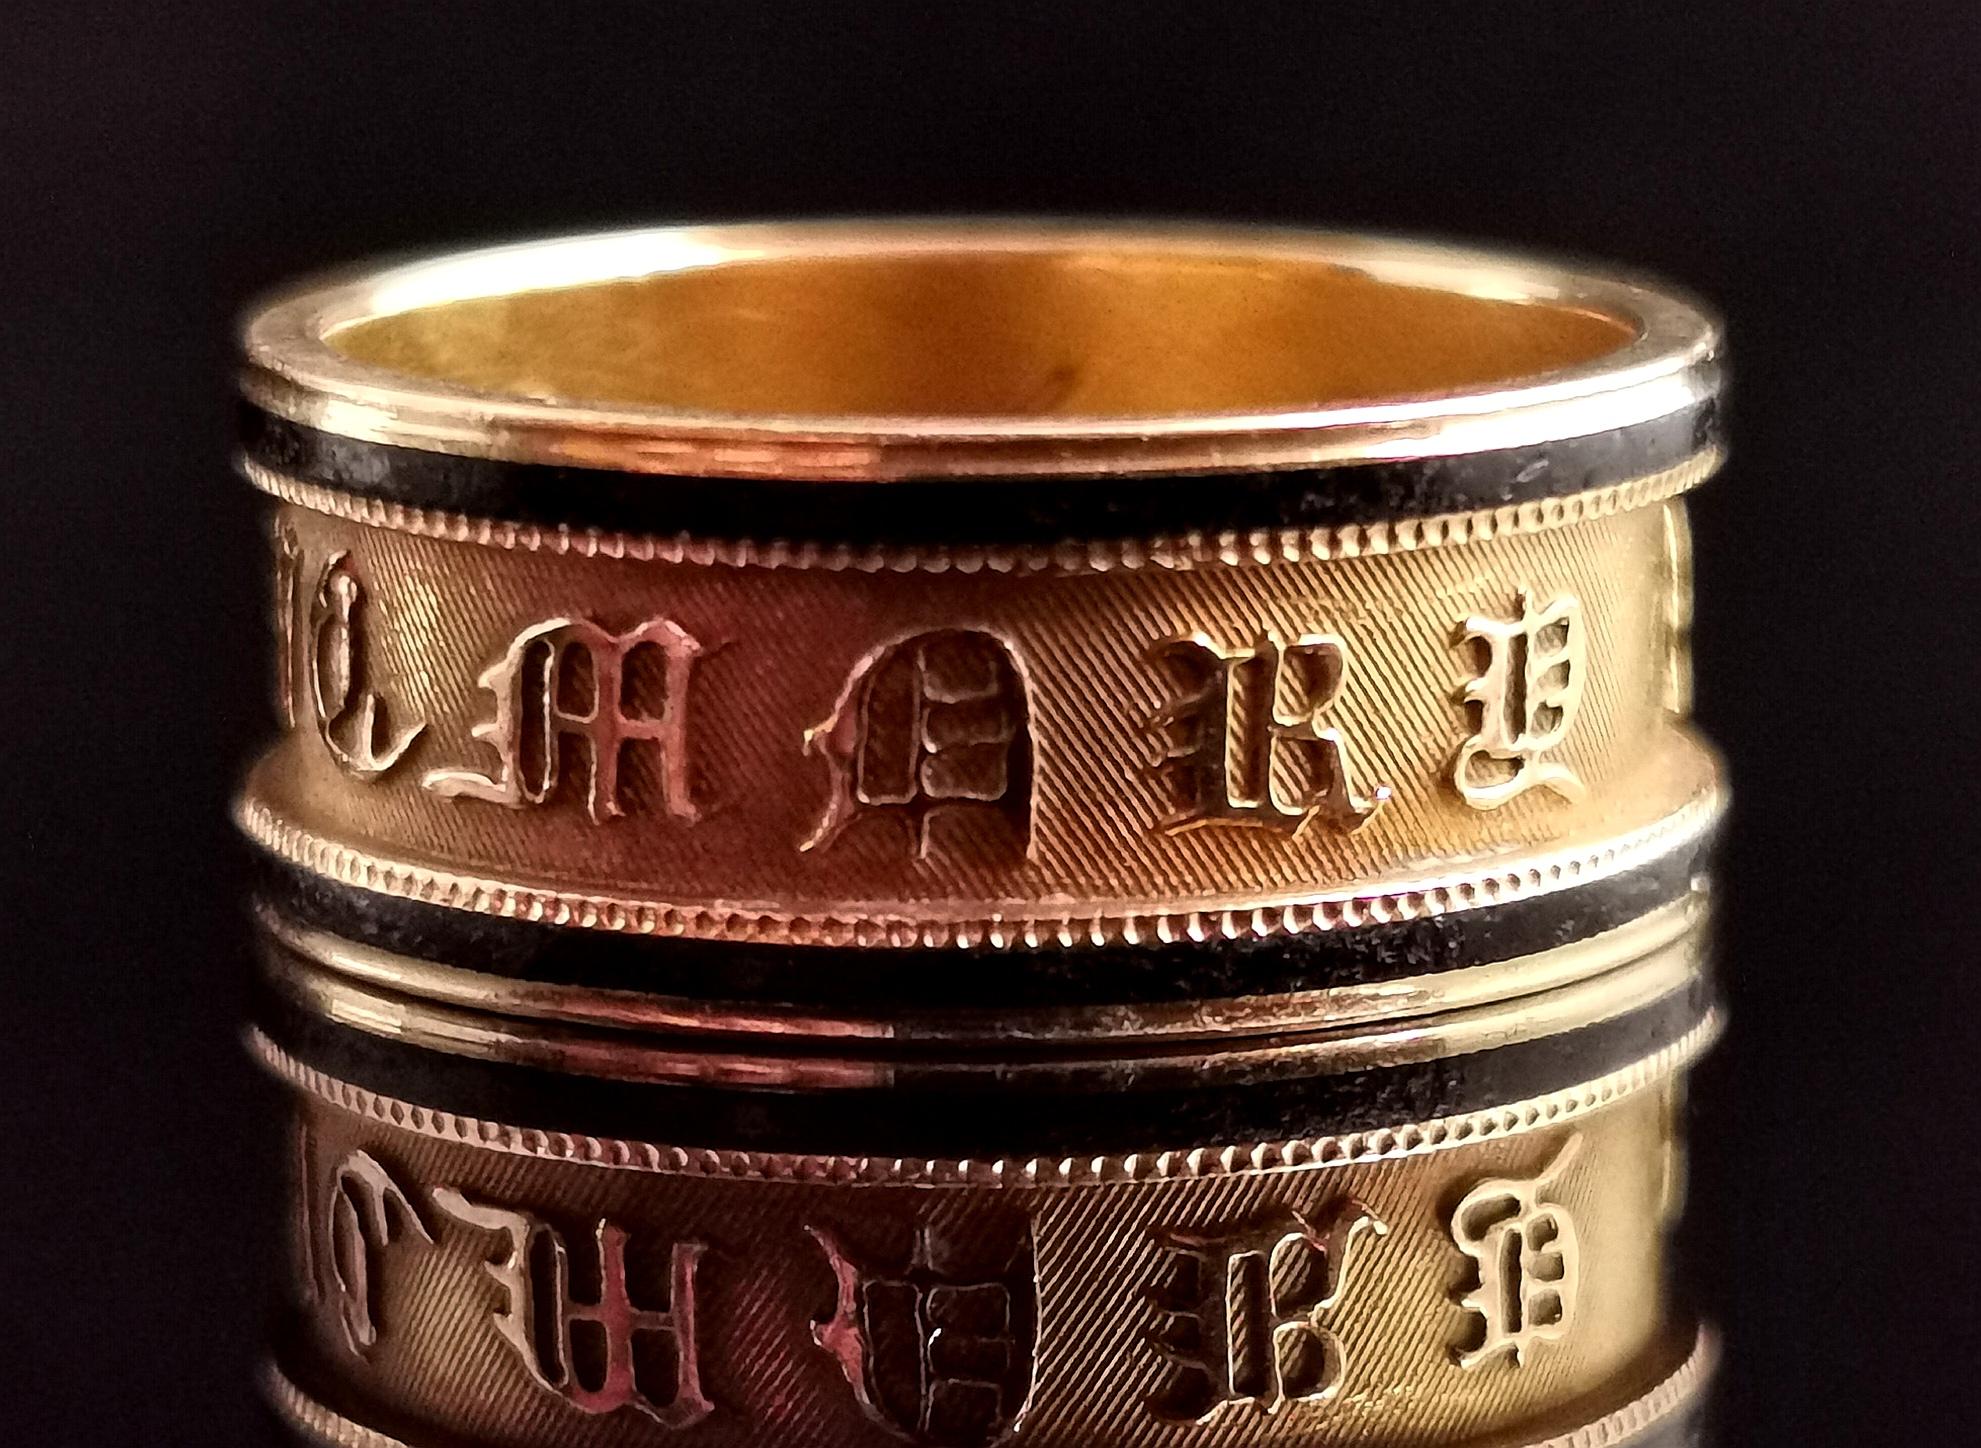 A truly stunning antique Georgian era mourning band ring.

Crafted in rich aged antique 18kt gold, it is a wide band style ring with an engraved and carved inner band.

It has a textured engraving to the centre recess and the words In Memory Of